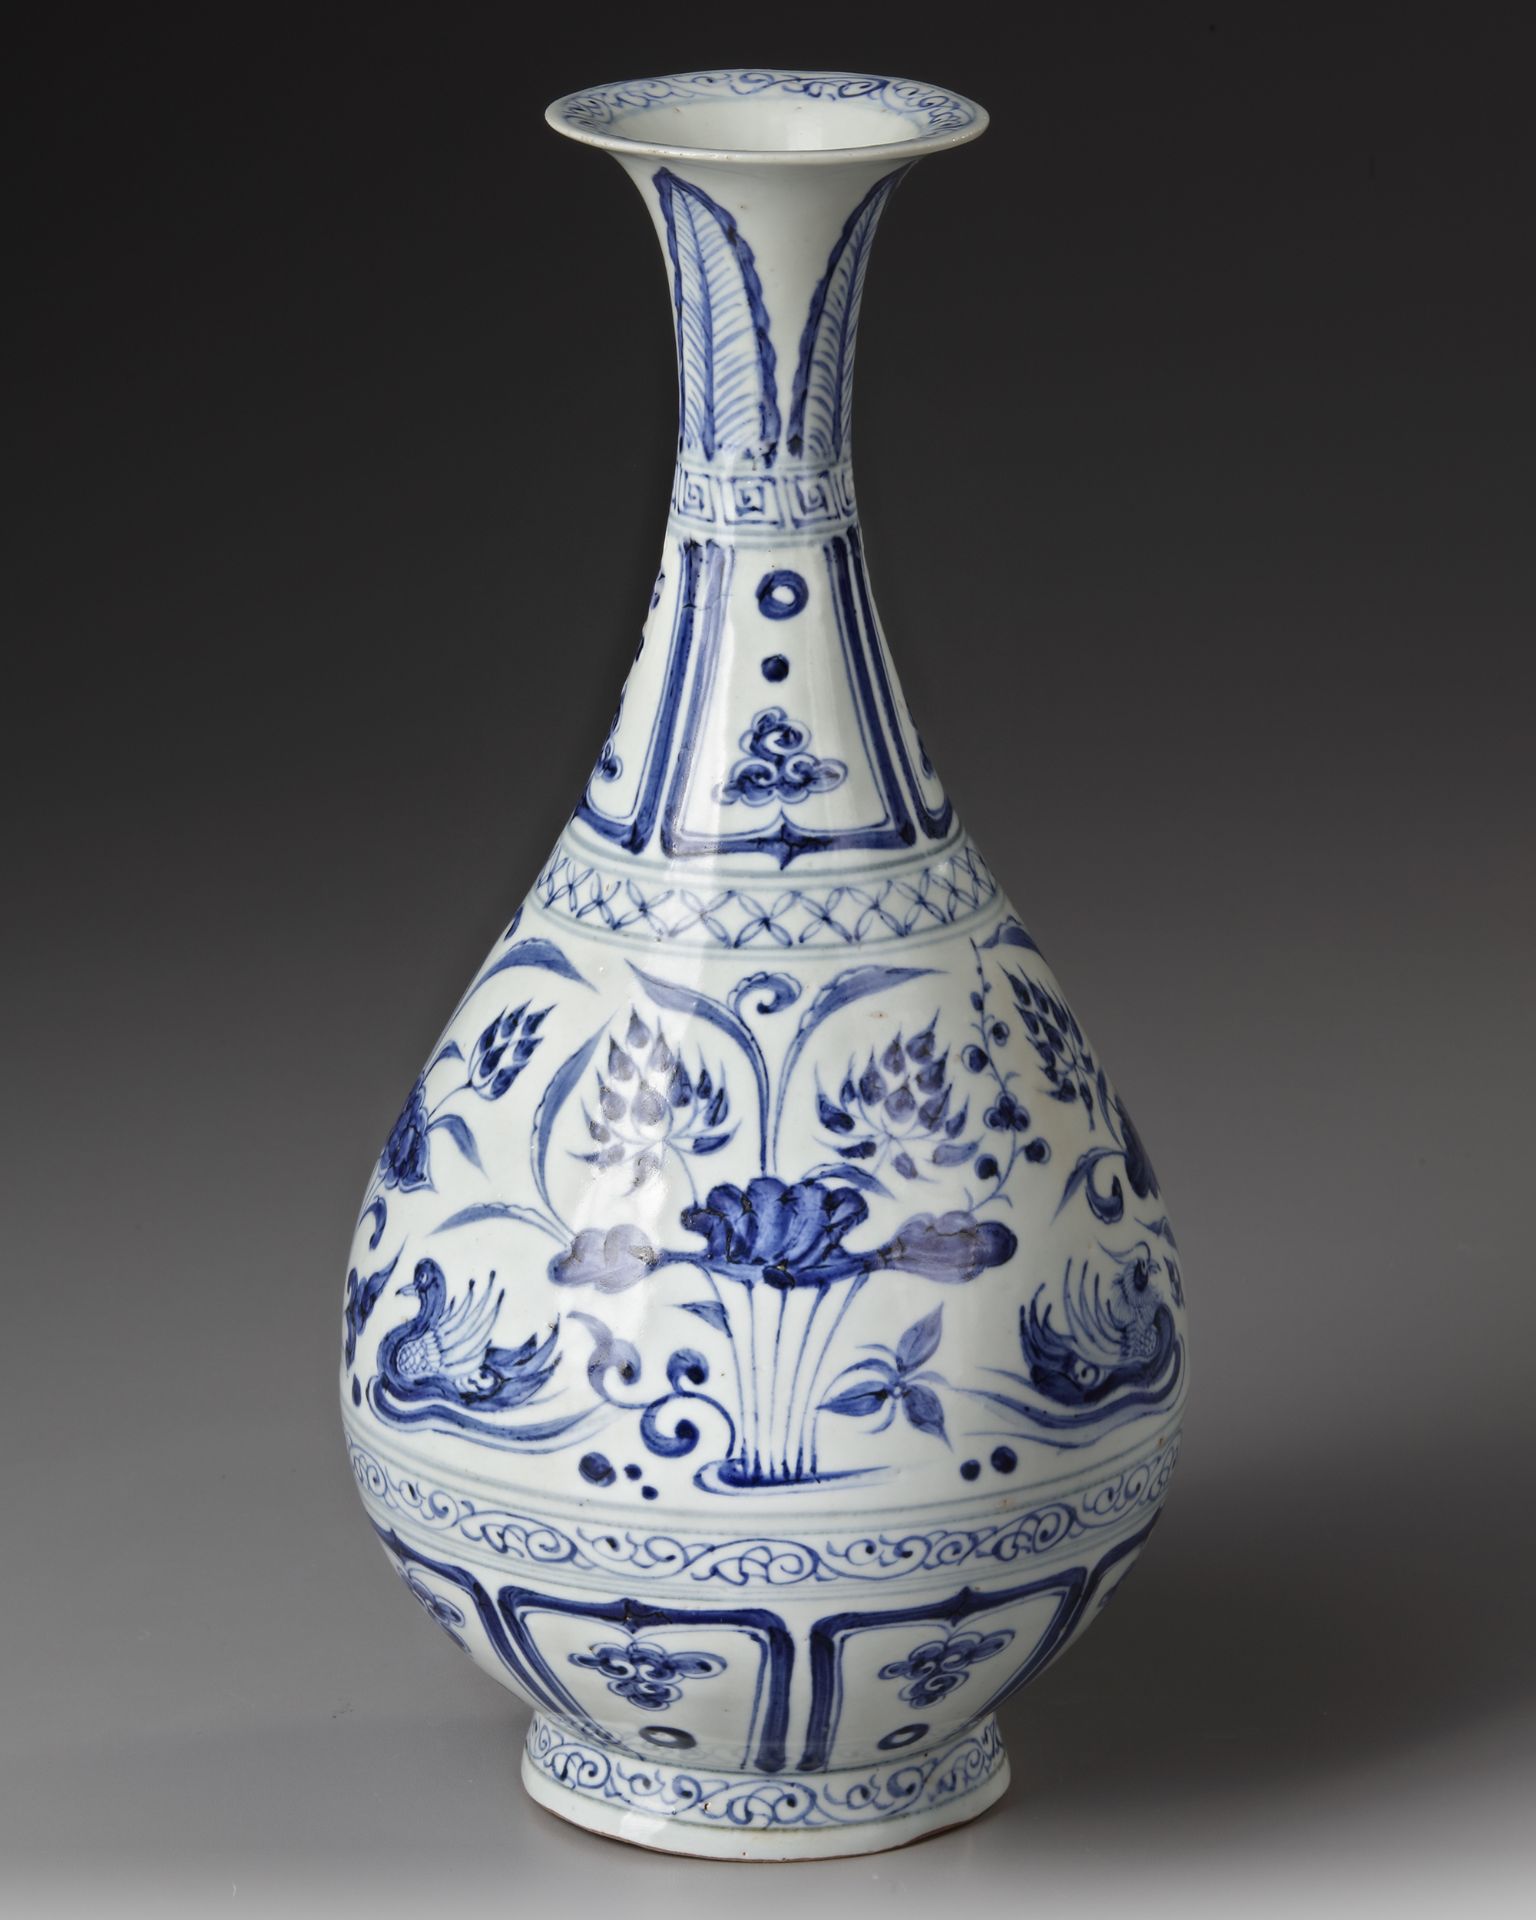 A CHINESE BLUE AND WHITE YUHUCHUNPING VASE, YUAN DYNASTY OR LATER - Image 2 of 4